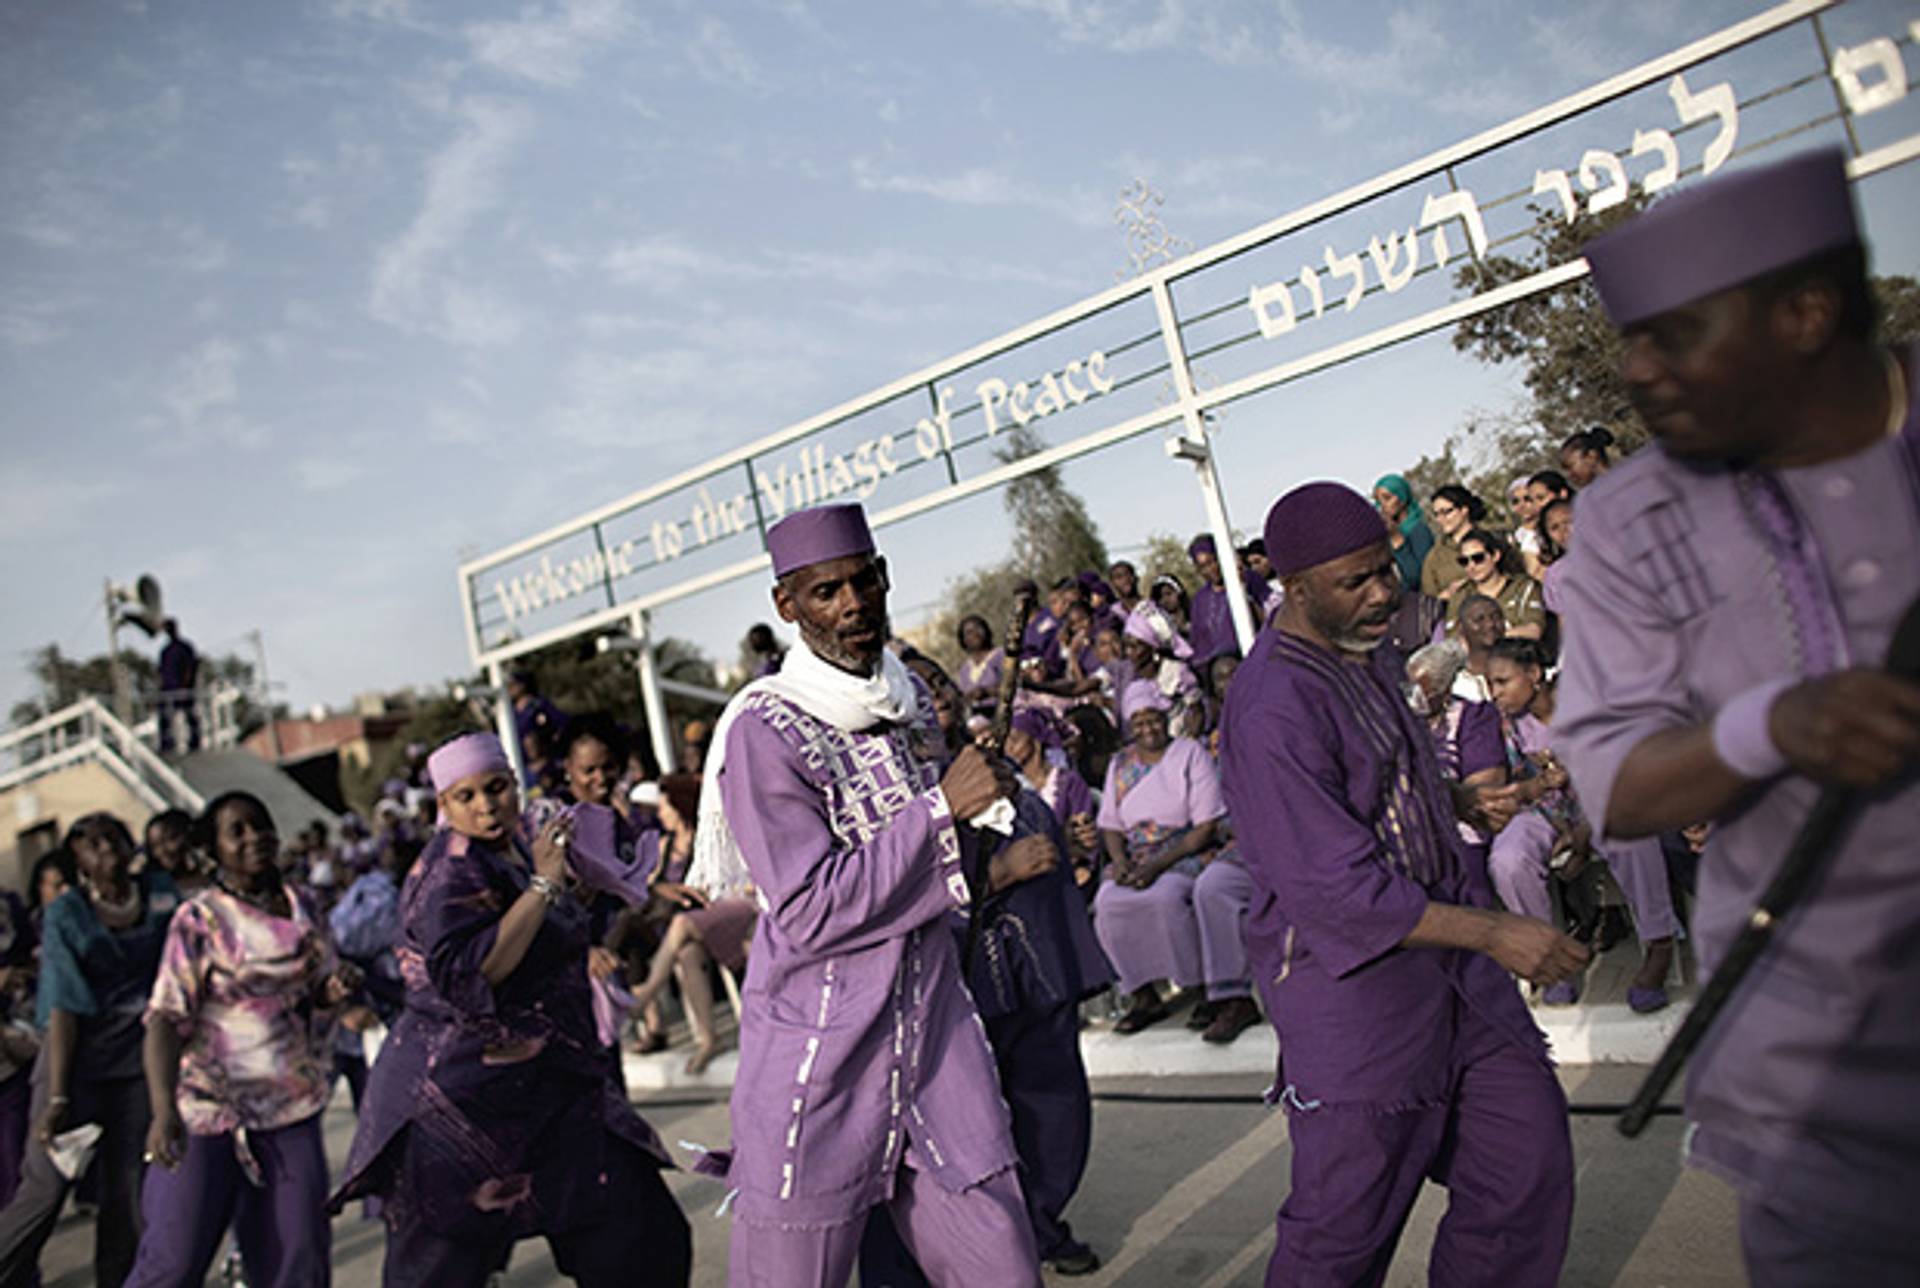 Members of the Hebrew Israelite community dance in Dimona during the Passover celebrations to mark the anniversary of their arrival in Israel.